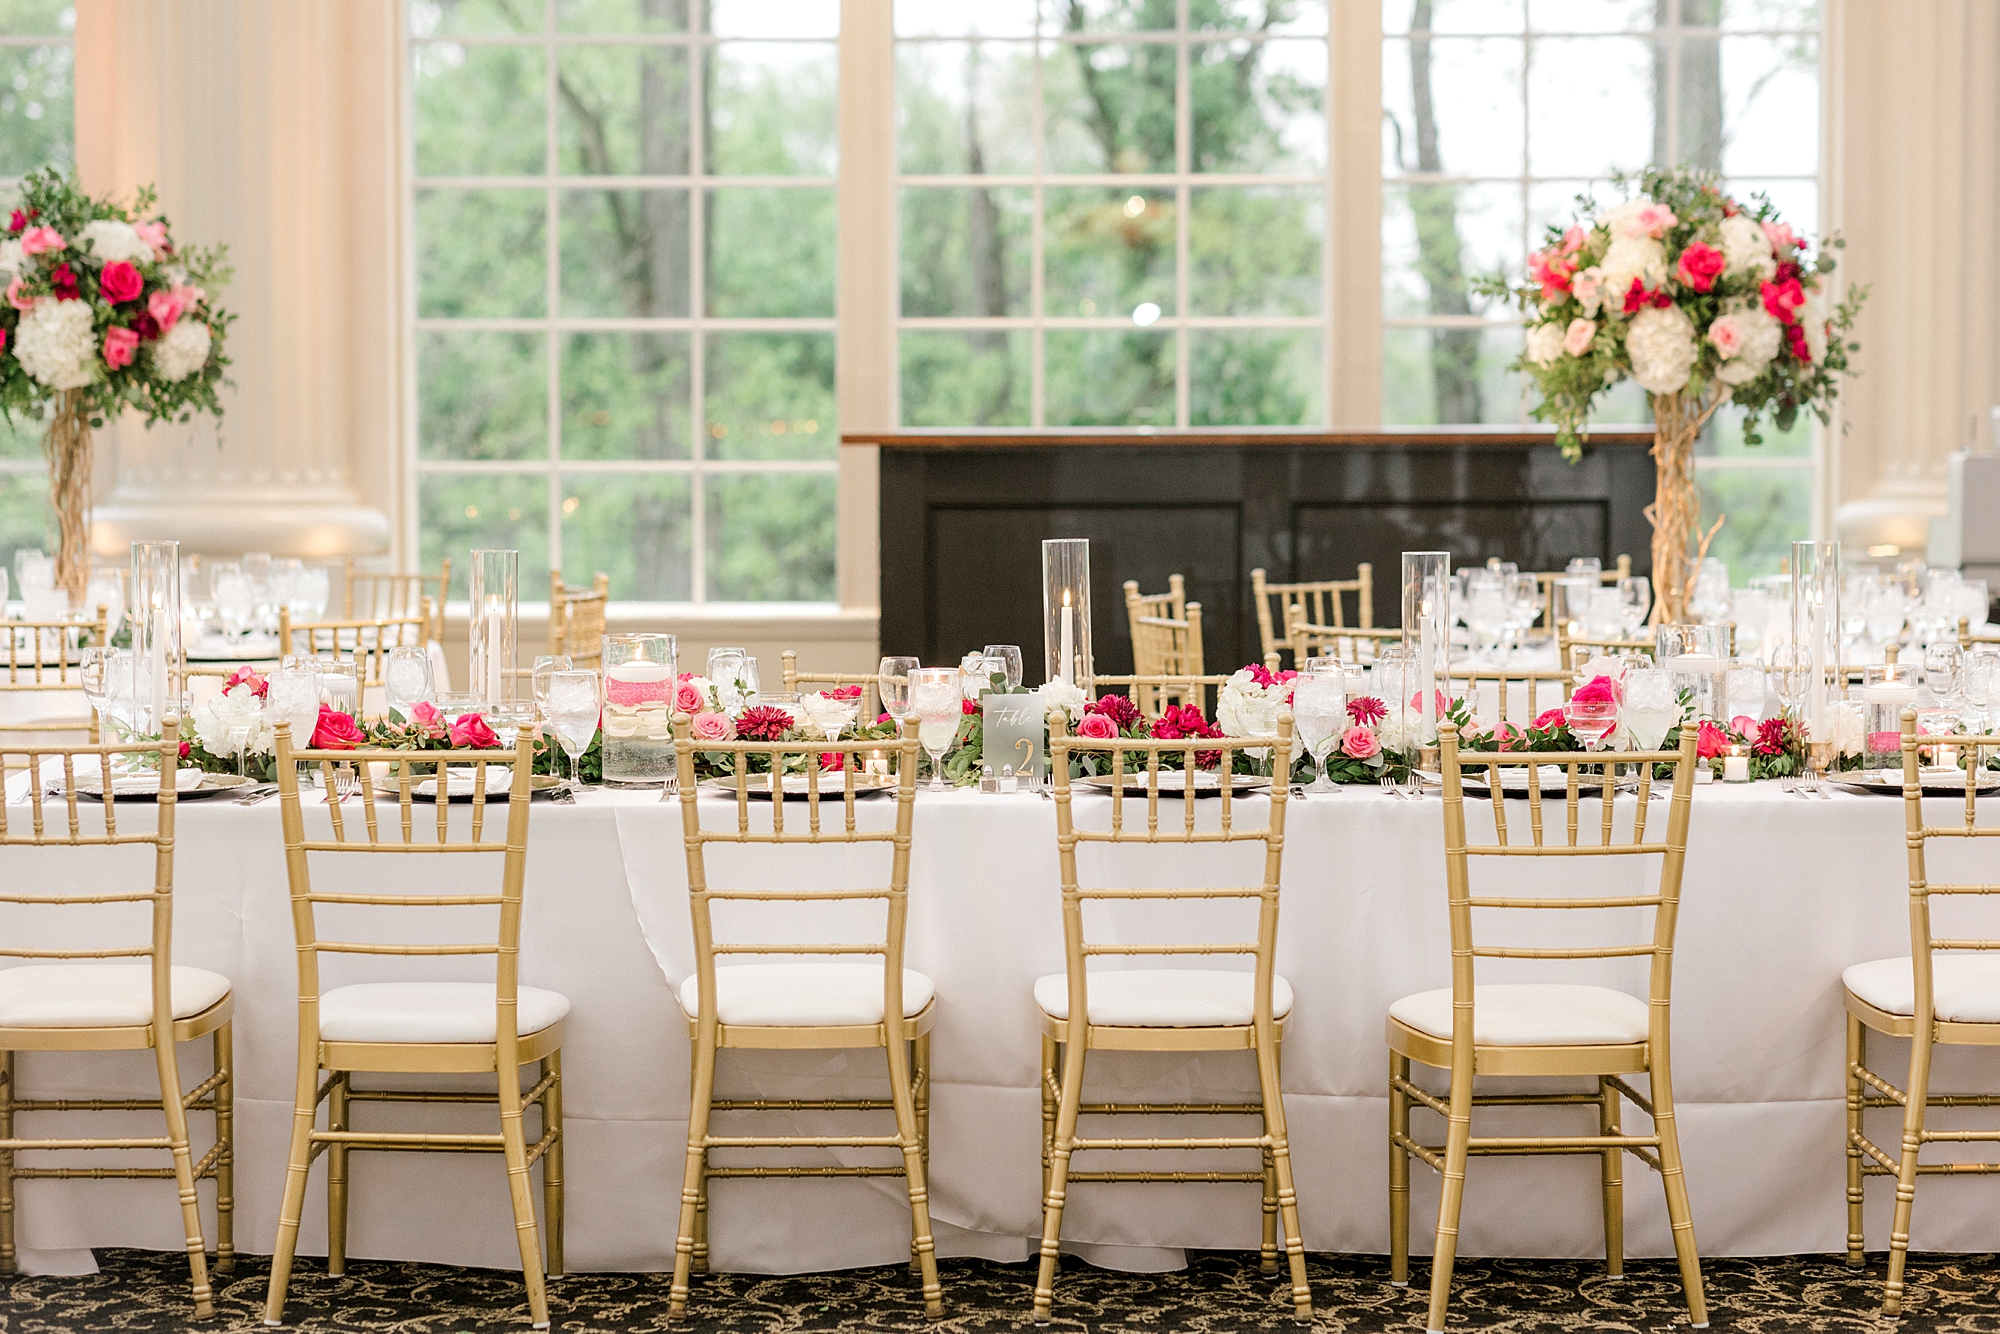 wedding reception table with gold chivalric chairs, pink and white floral centerpieces, and tall white candles